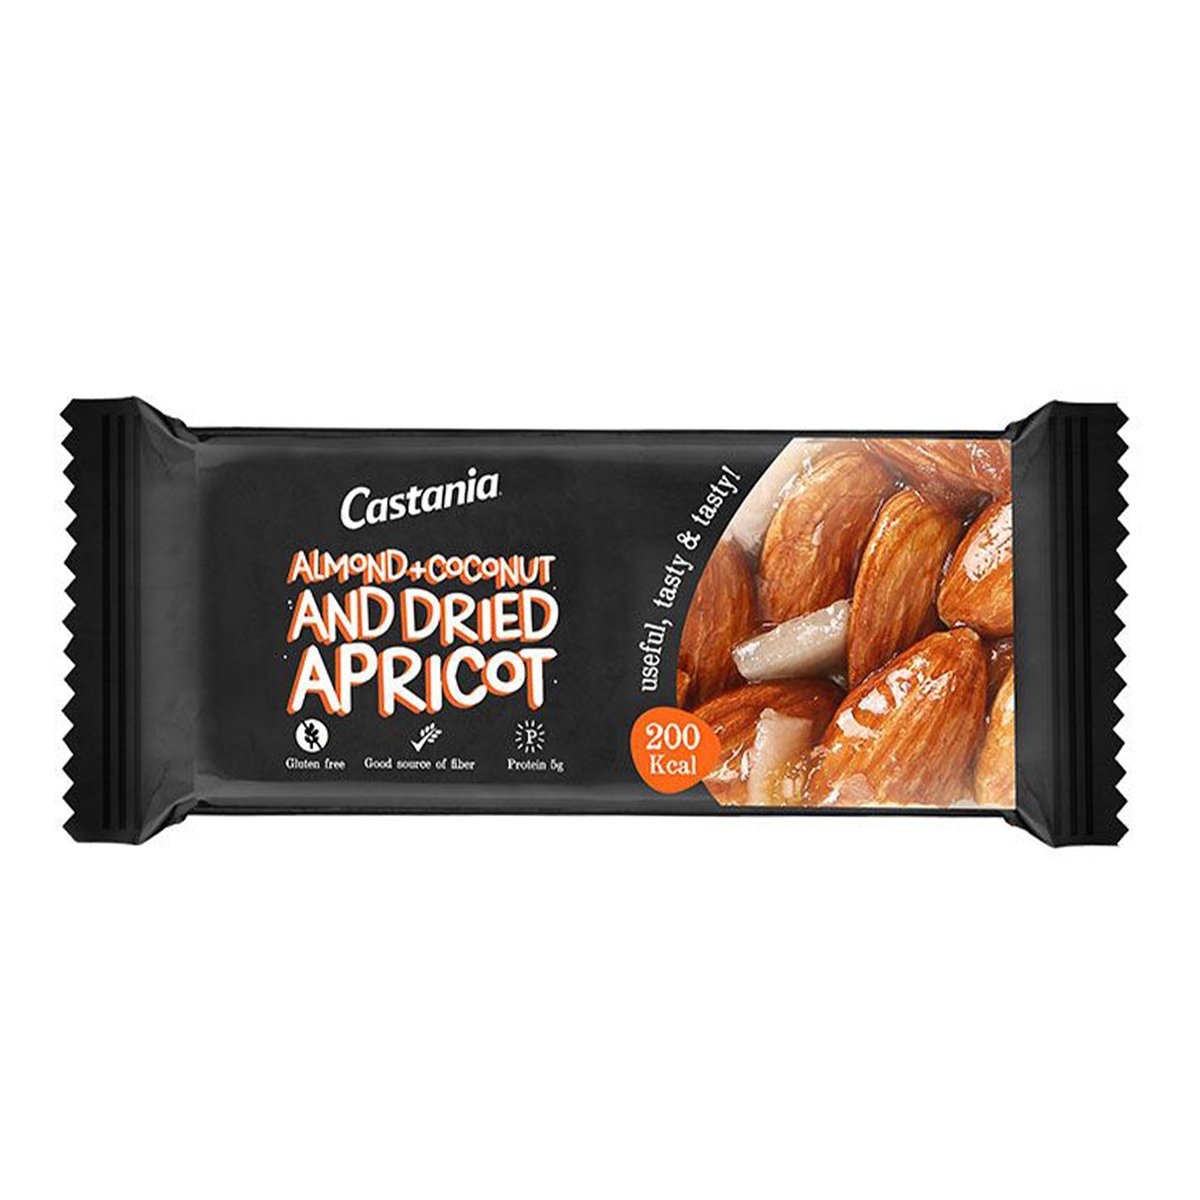 Castania Almond + Coconut And Dried Apricot Bar 38 g